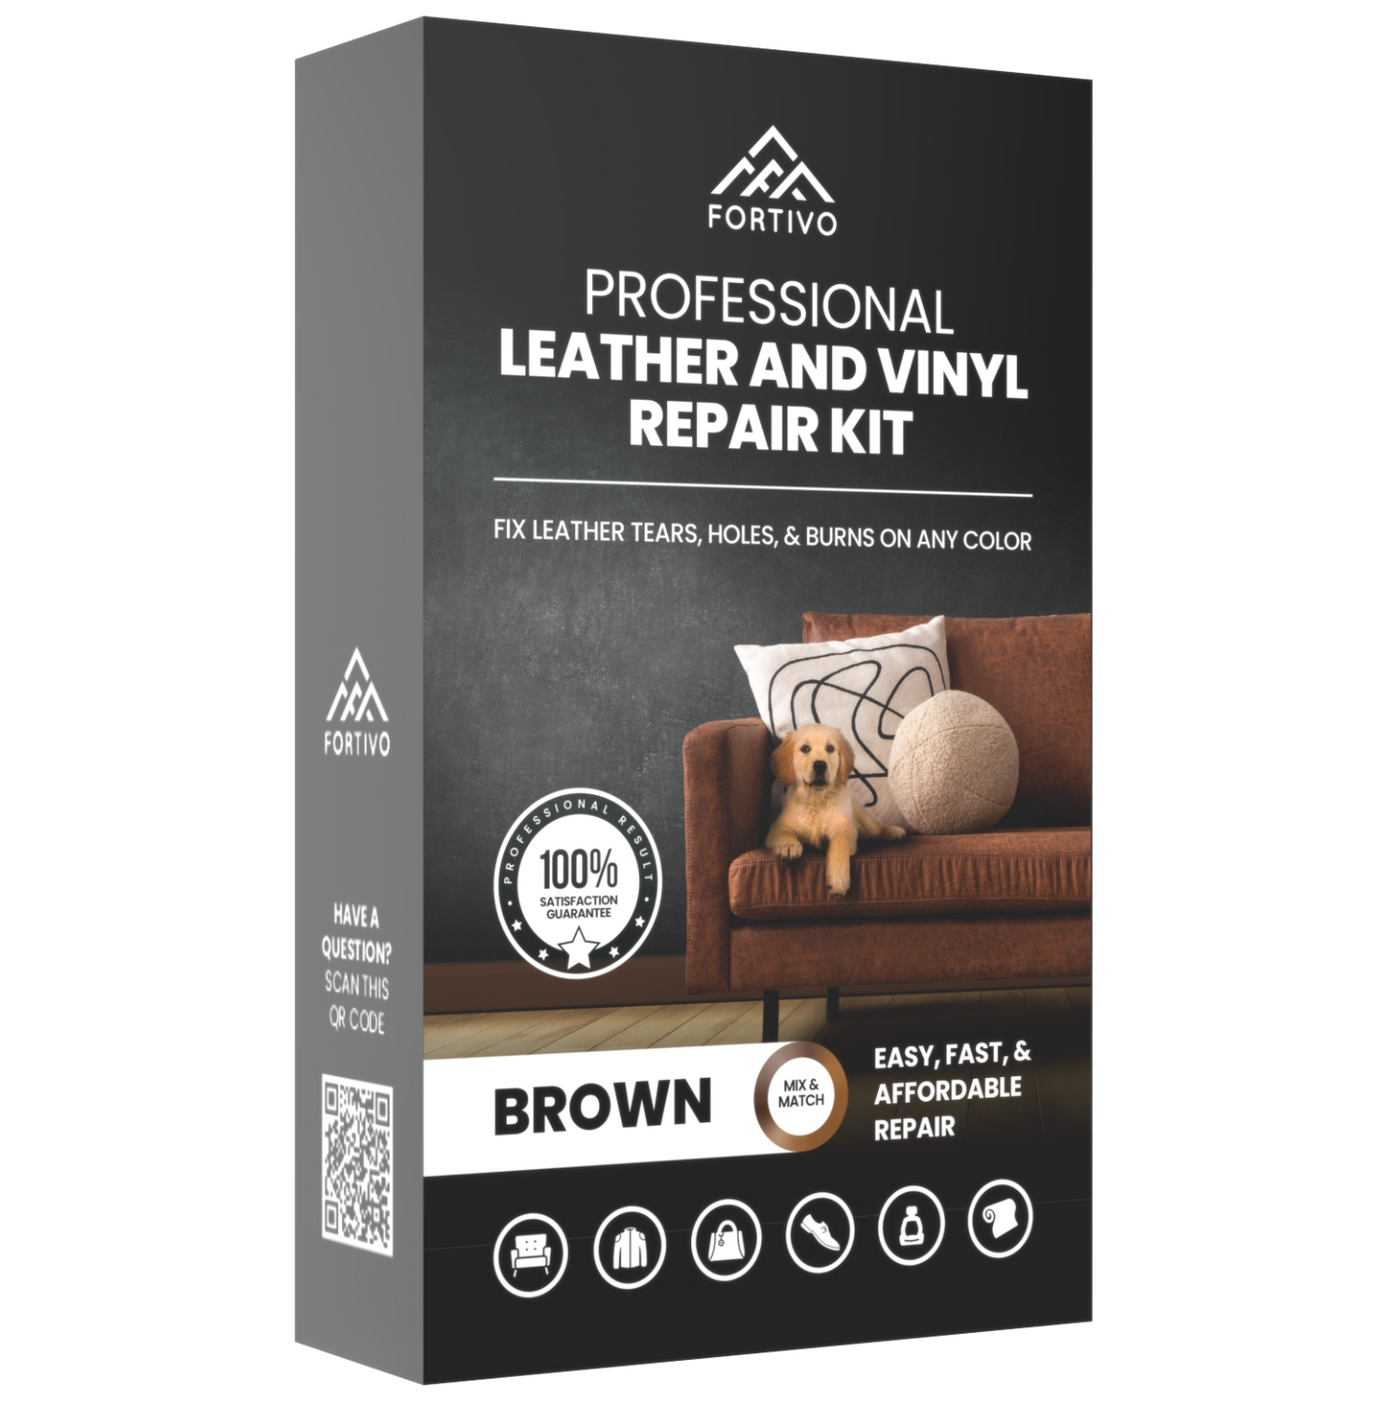  FORTIVO Black Leather and Vinyl Repair Kit and Brown Leather  Repair - Furniture, Couch, Car Seats, Sofa, Jacket, Purse, Belt, Shoes, Genuine, Italian, Bonded, Bycast, PU, Pleather